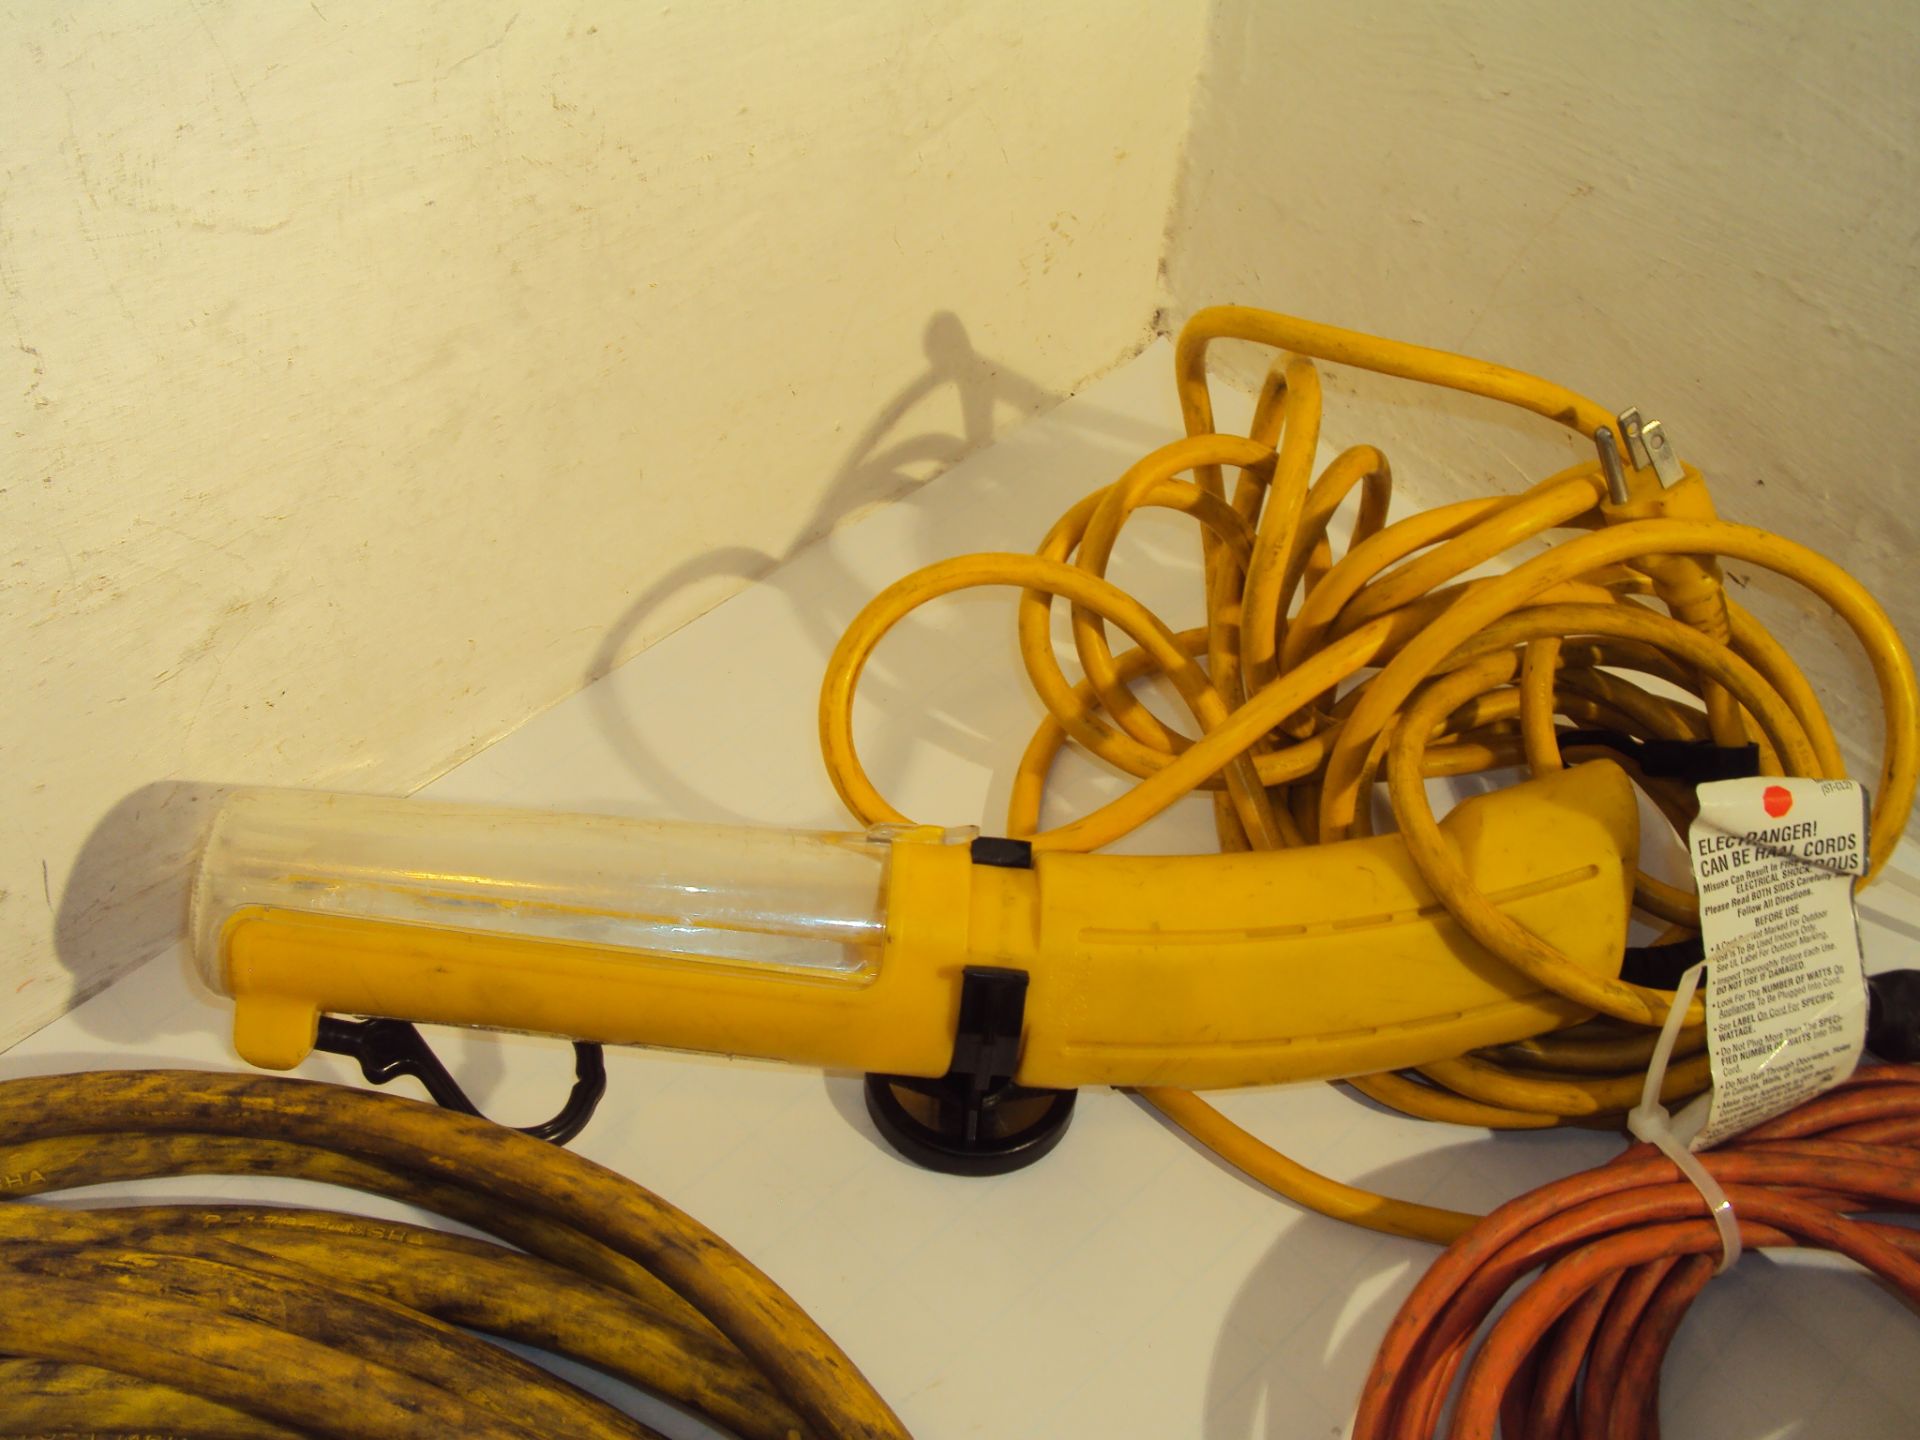 Extension Cords and Trouble Light - Image 2 of 5